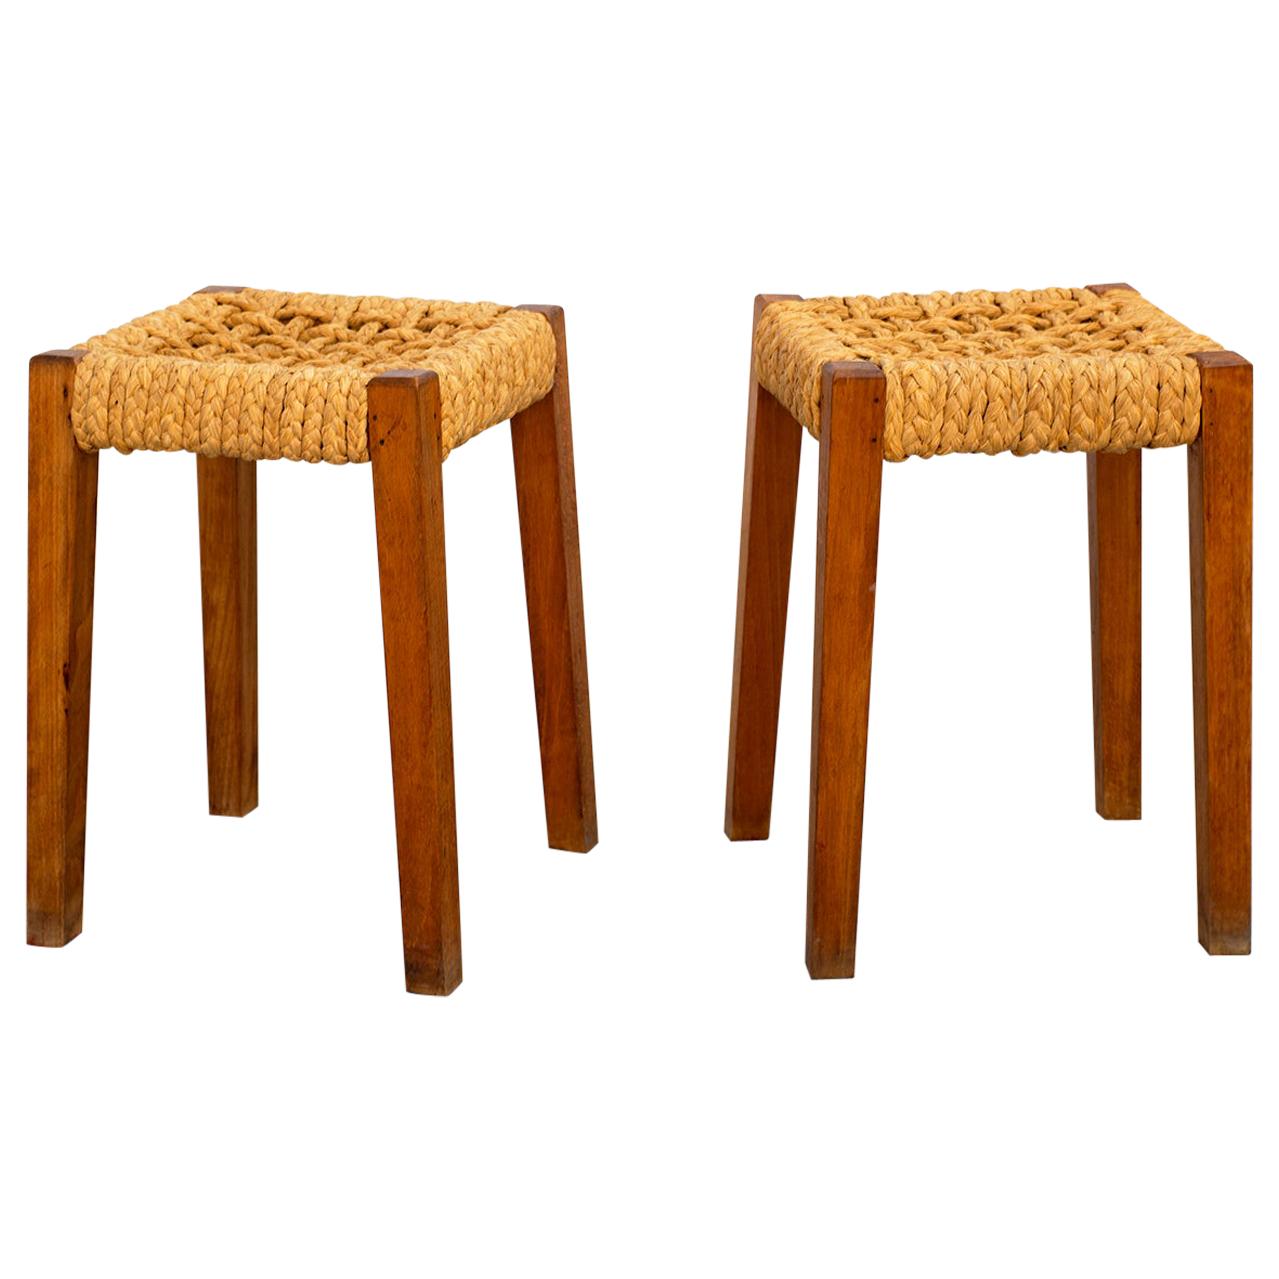 Pair of Stools by Audoux Minet